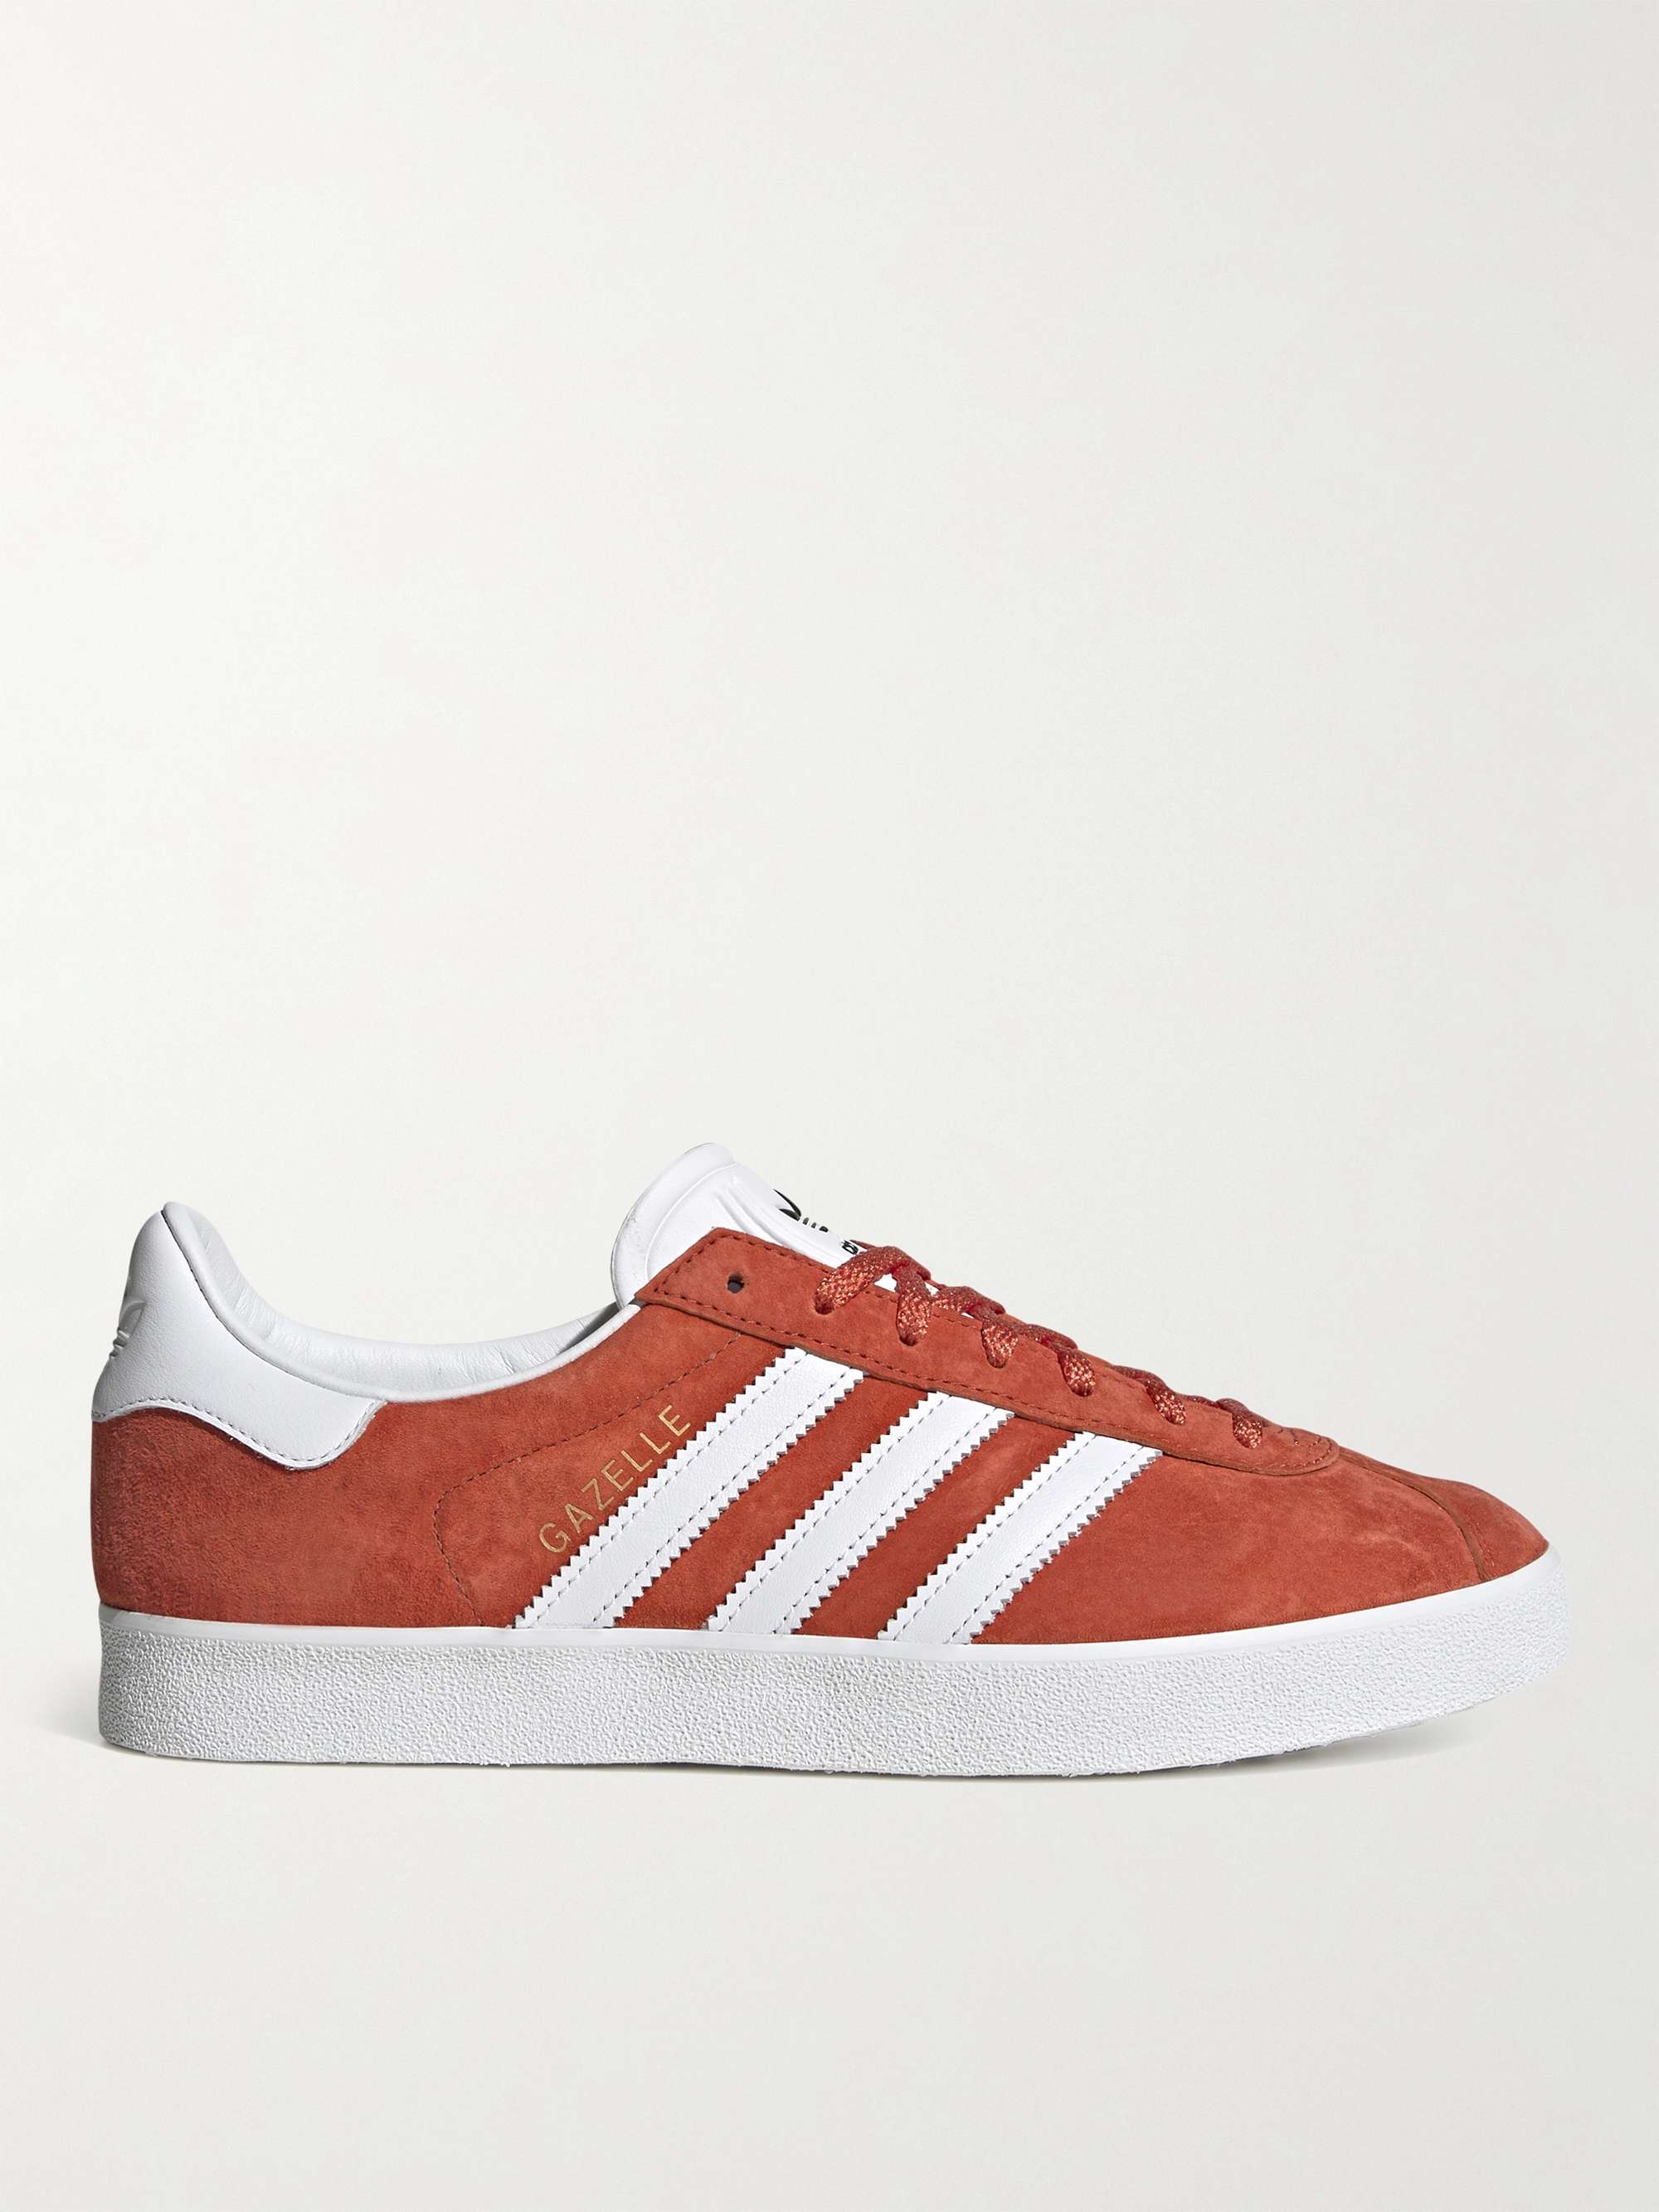 Red Gazelle 85 Leather-Trimmed Suede Sneakers | ADIDAS ORIGINALS | MR PORTER